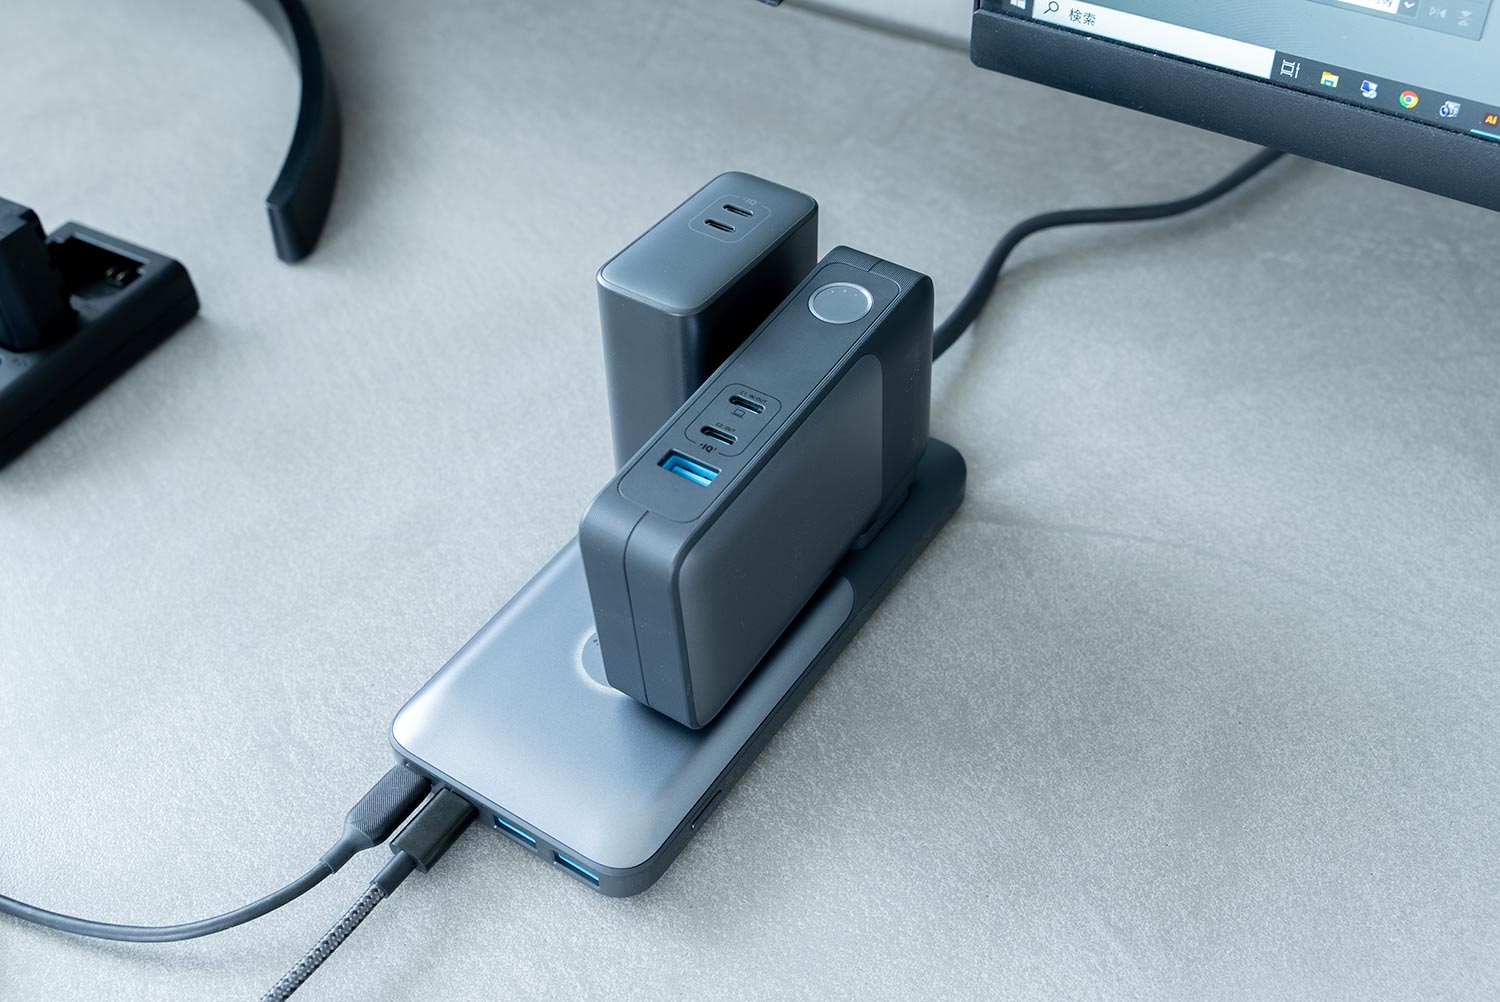 『Anker 727 Charging Station』使用イメージ